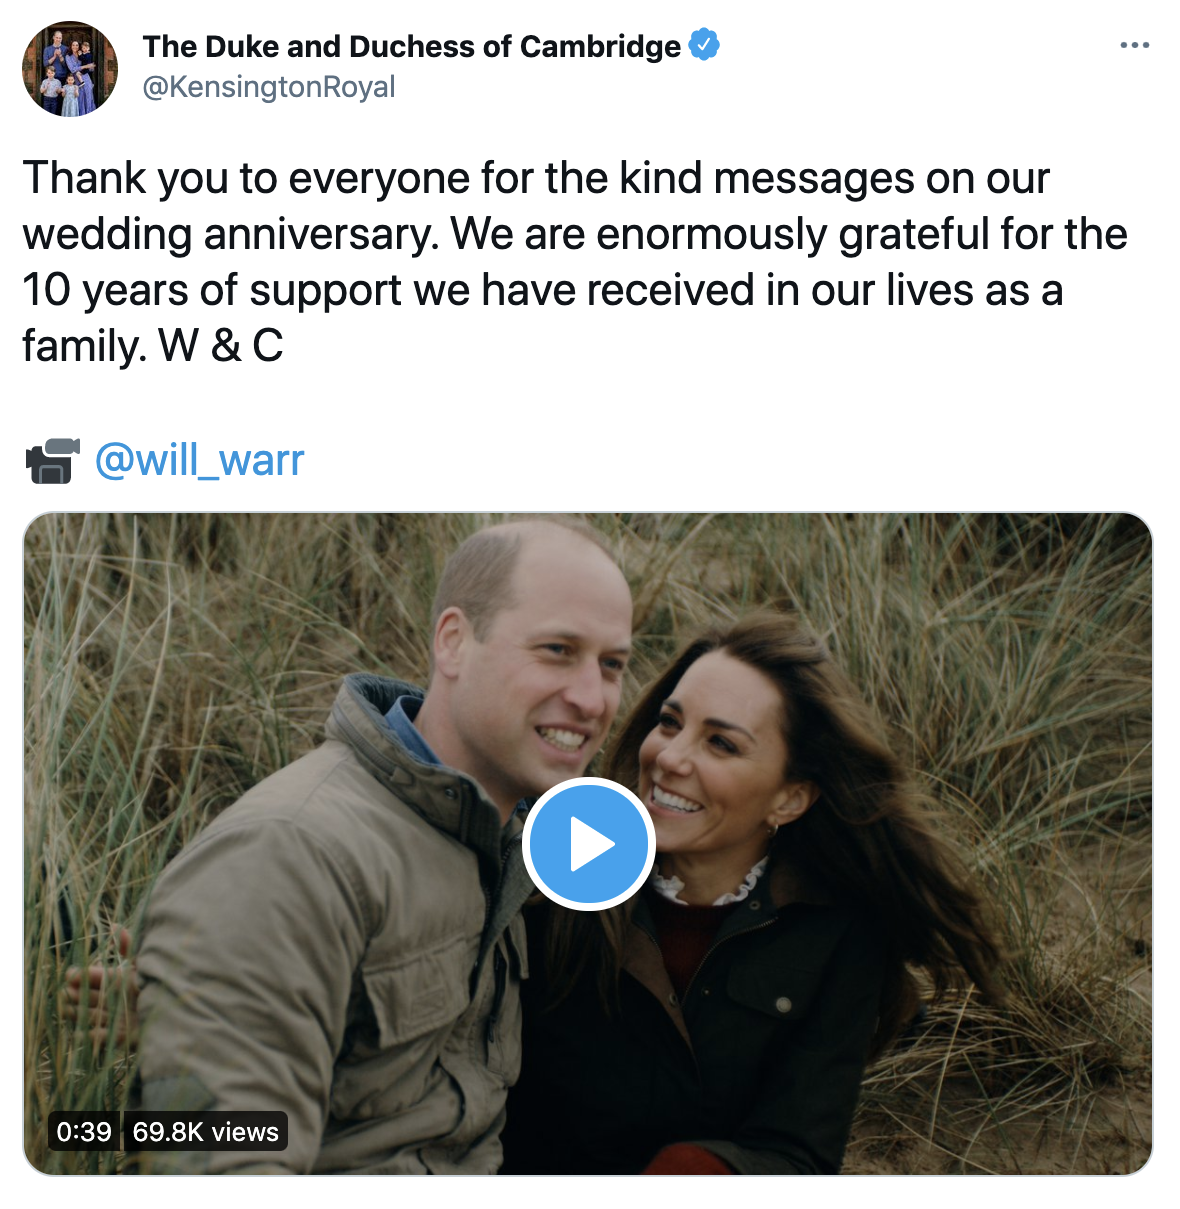 William and Kate thanks supporters for the messages they sent as they celebrated their 10th wedding anniversary.